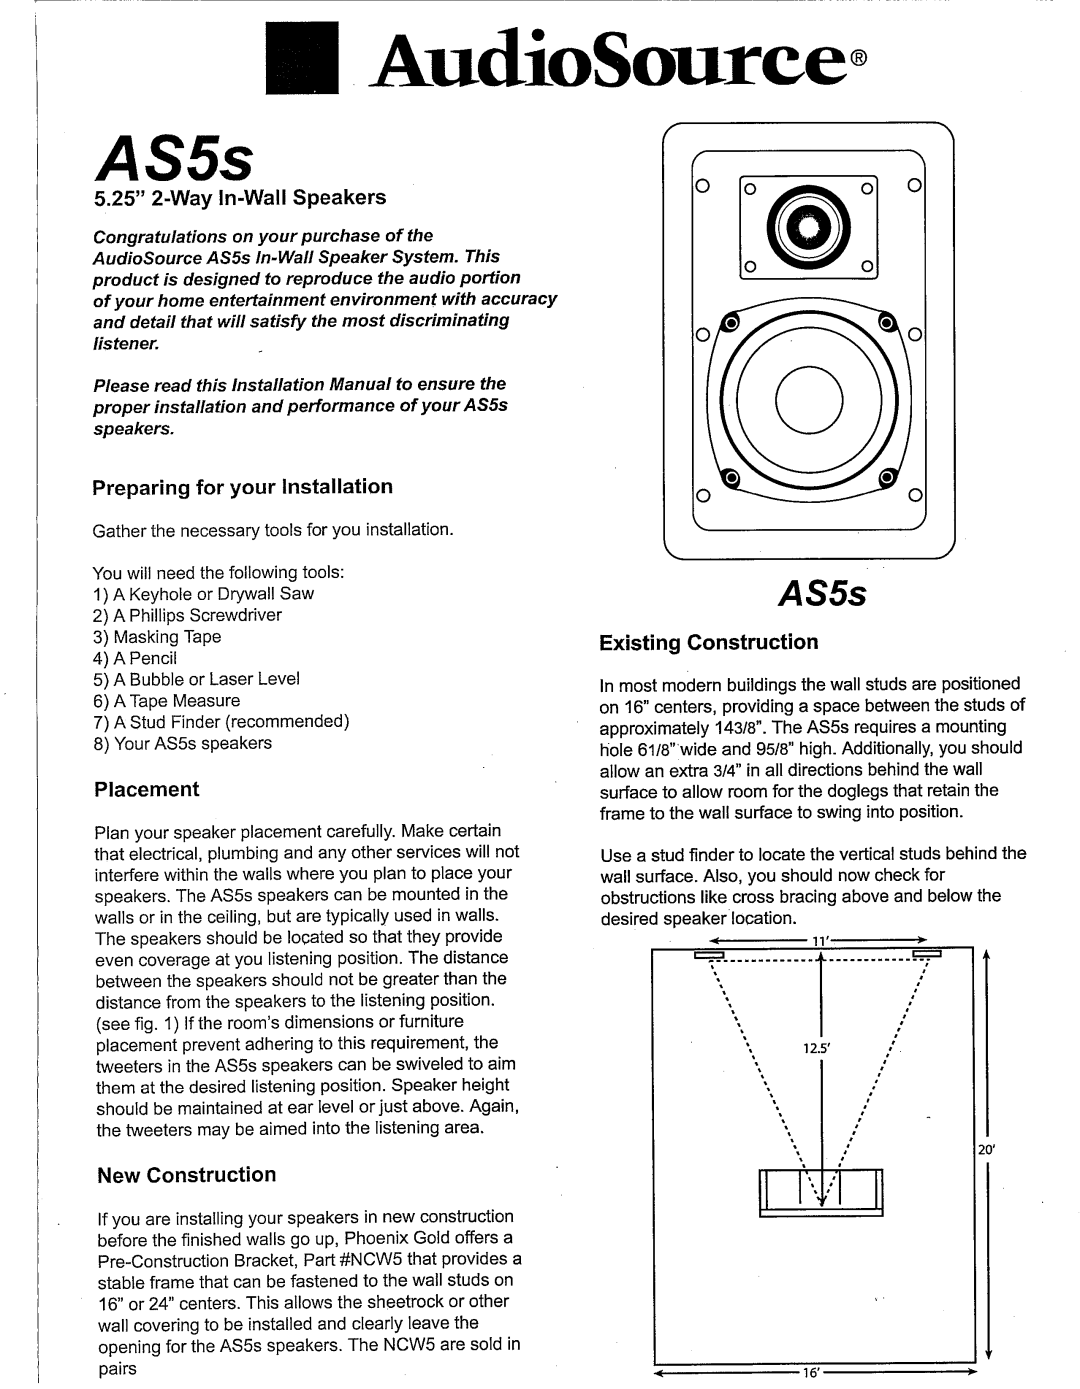 AudioSource 5.25" 2-Way In-Wall Speakers, AS5s manual 